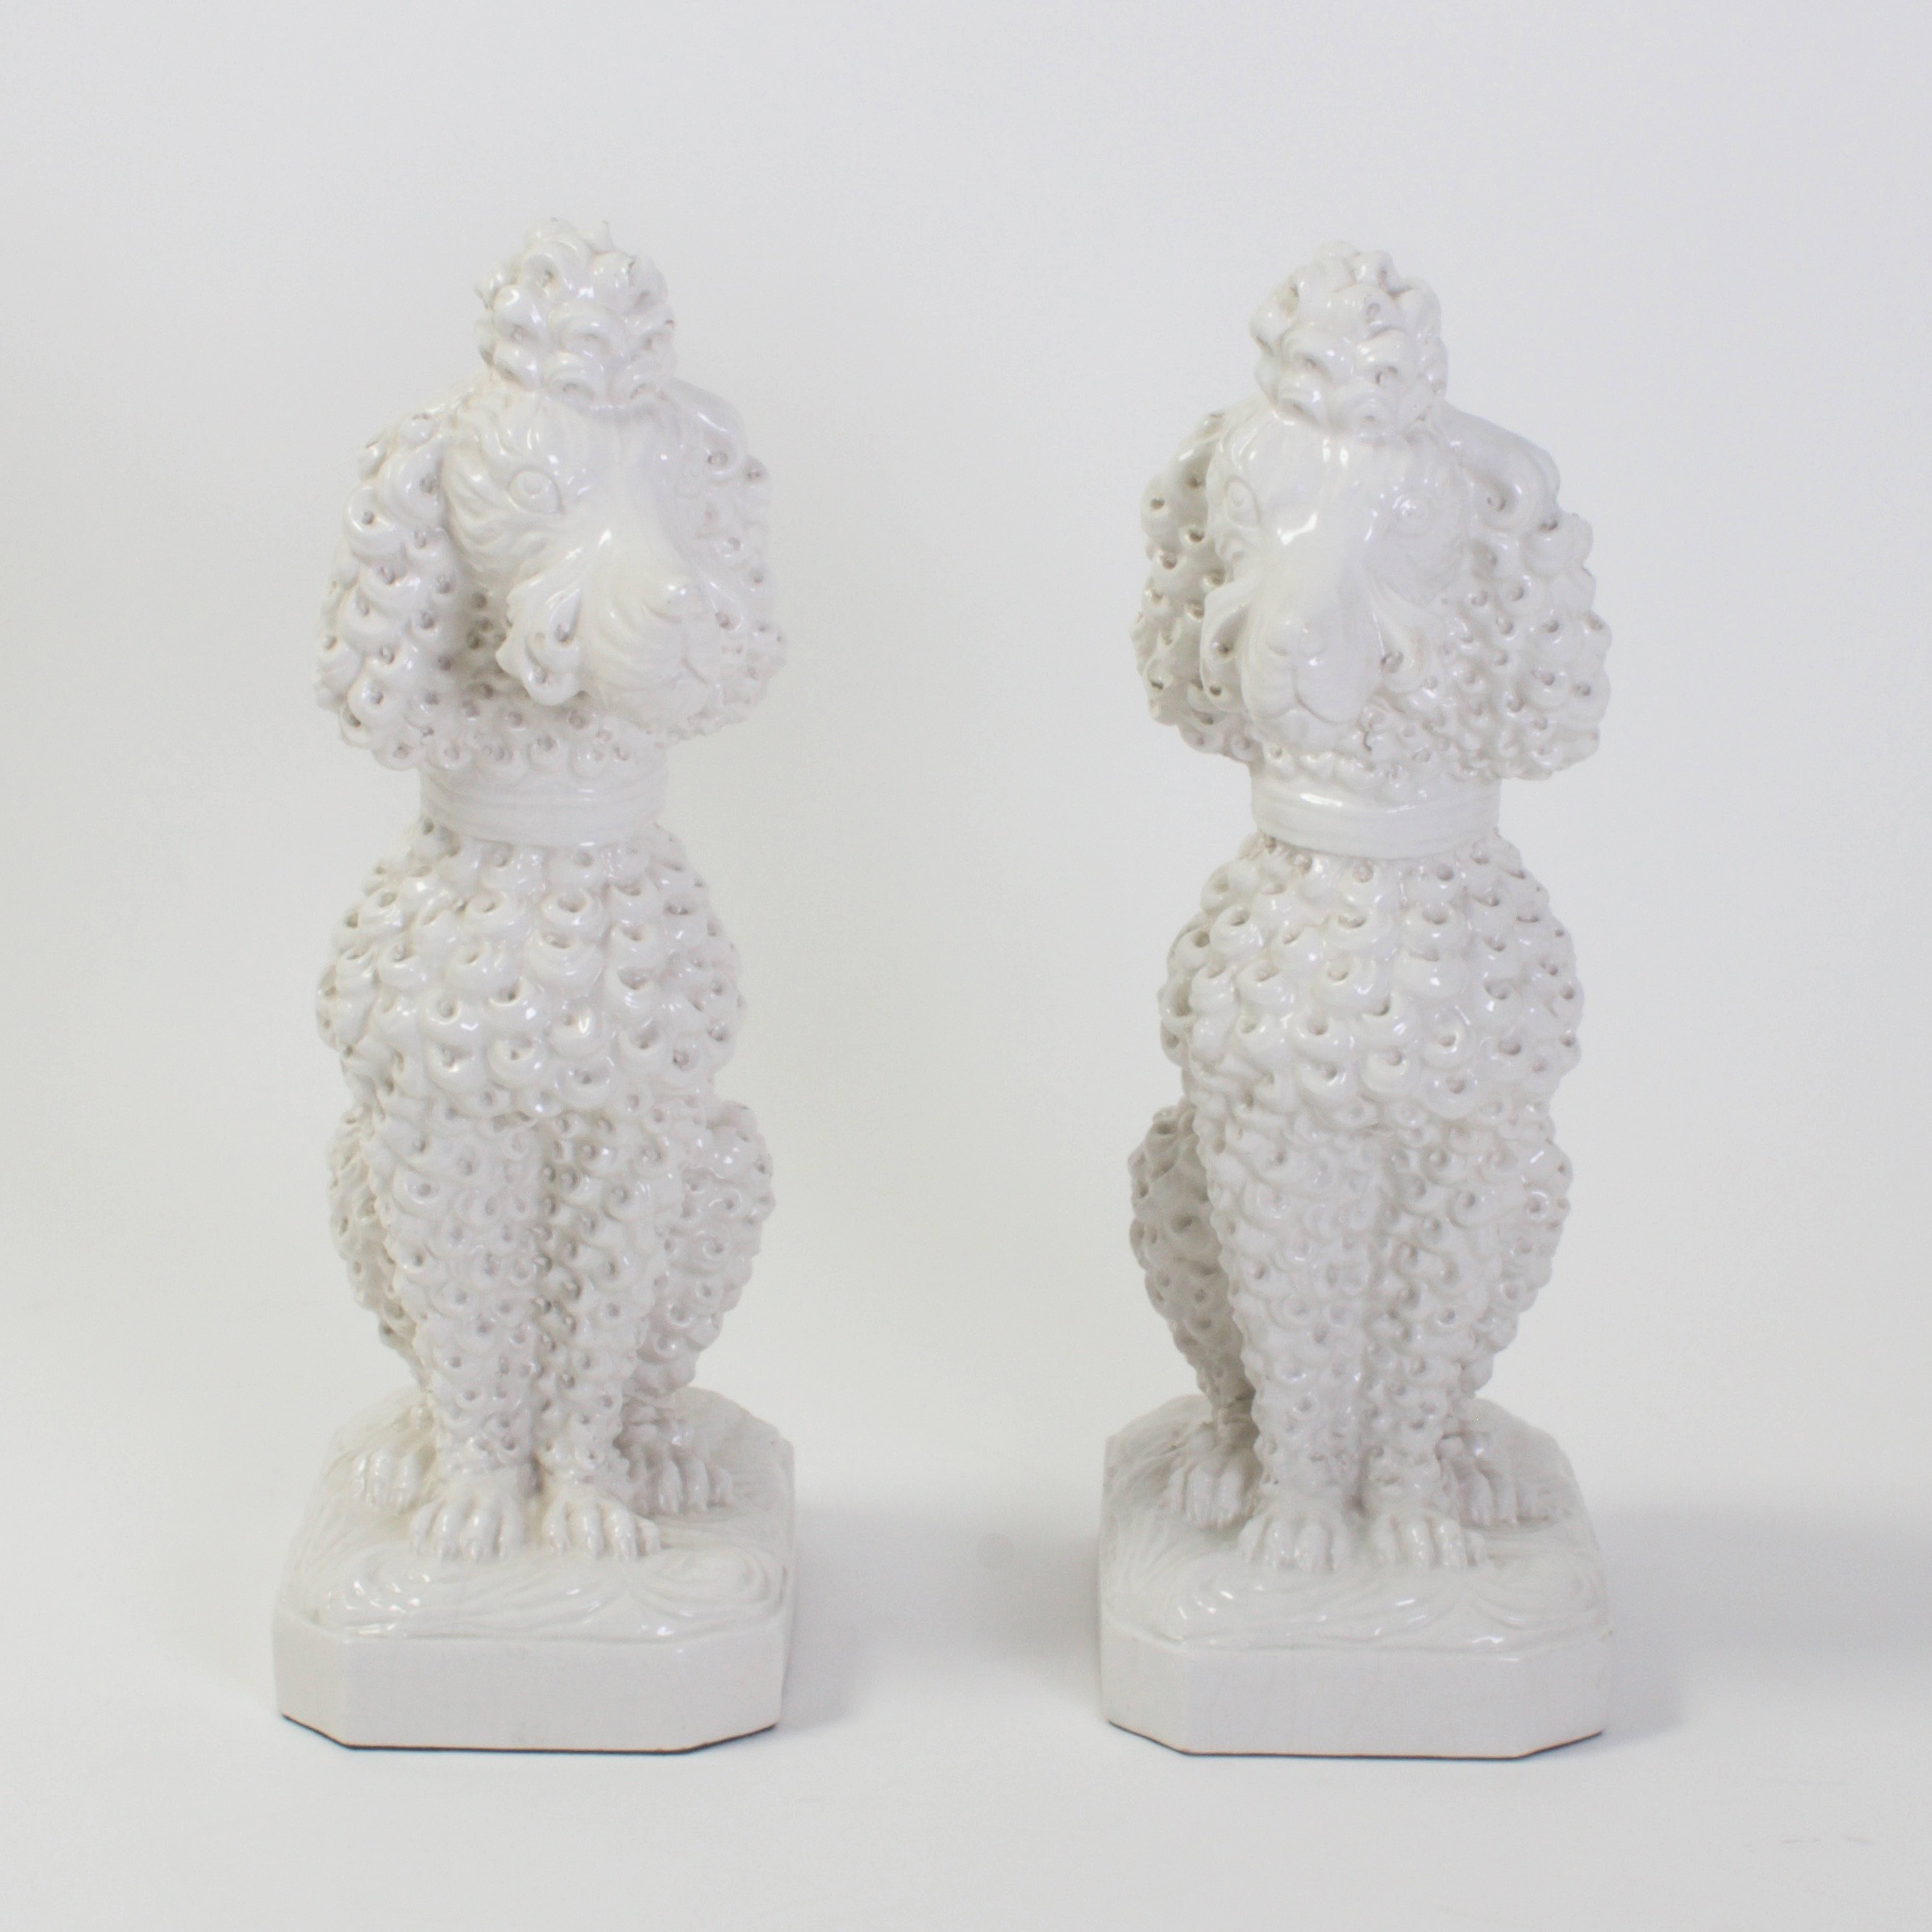 Classic pair of Mid-Century poodle figures made of ceramic, then glazed in a white celadon, and sporting the iconic poodle doo. Signed on the bottom, made in Italy, 